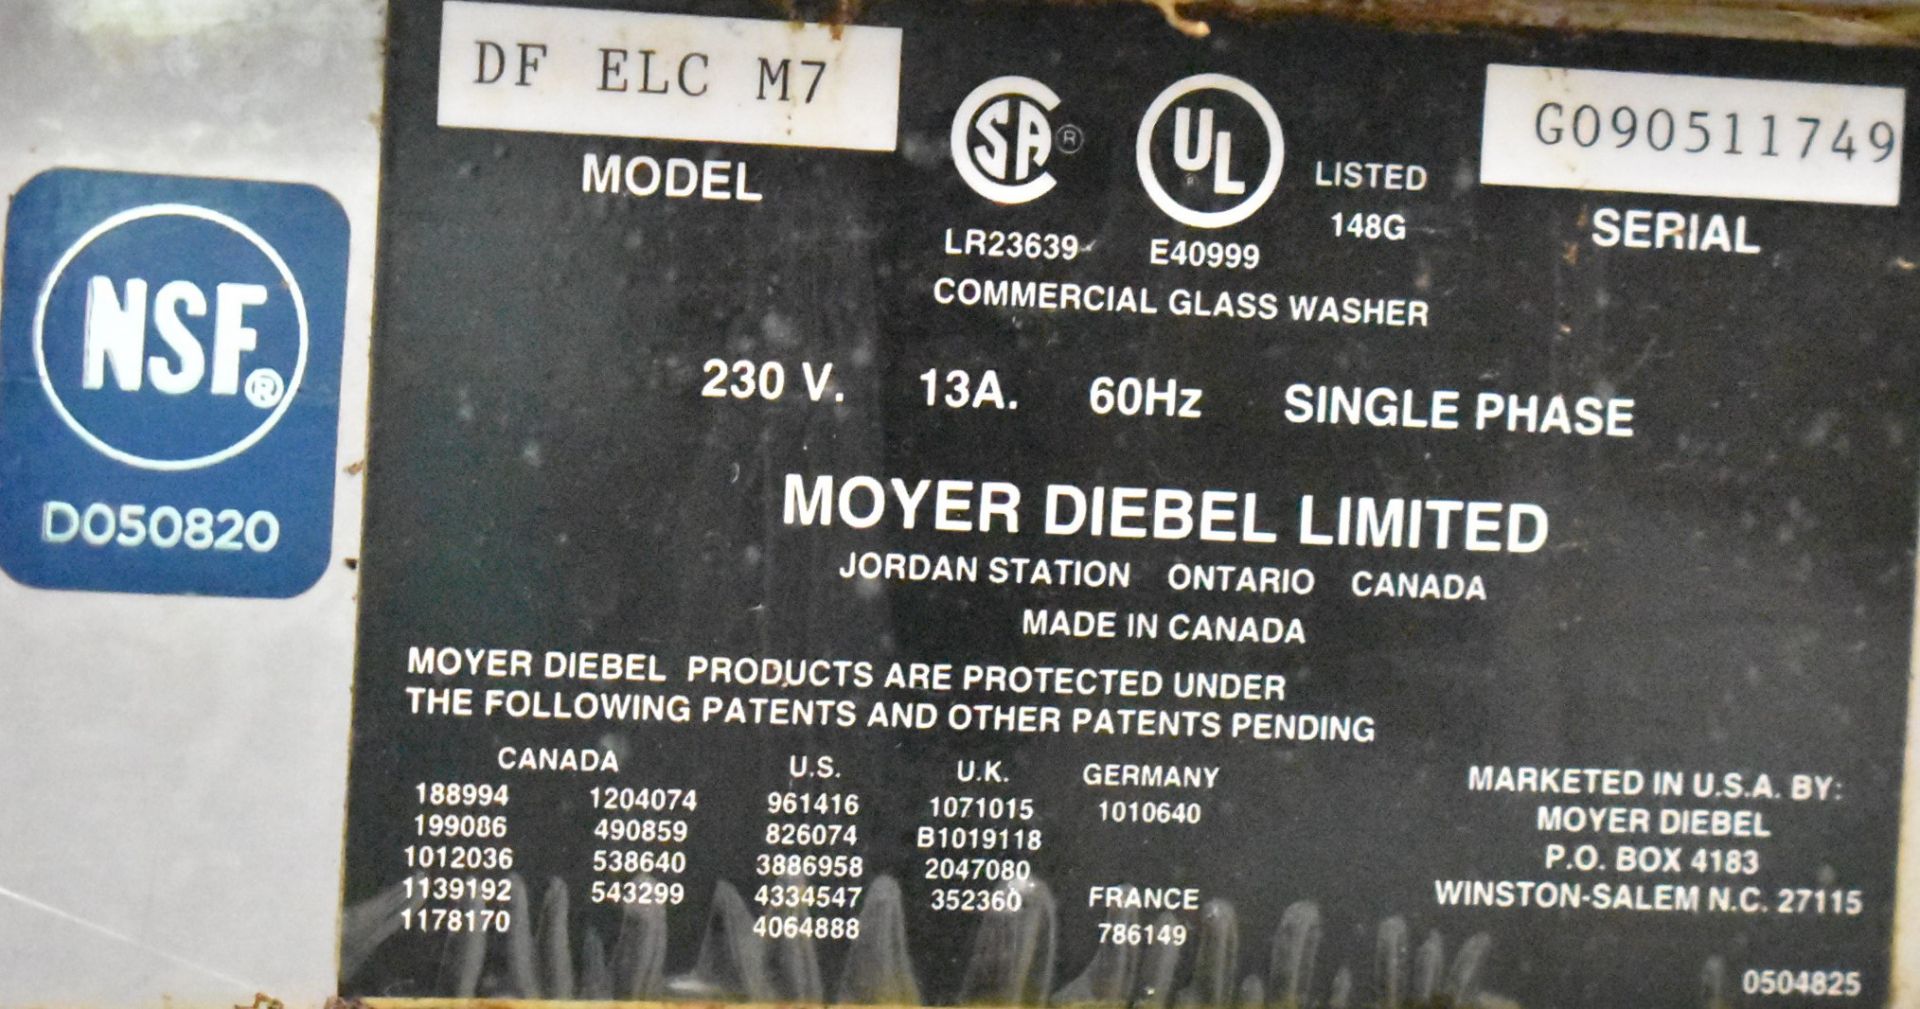 MOYER DIEBEL DF ELC M7 COMMERCIAL GLASS WASHER, S/N G090511749 [RIGGING FEES FOR LOT #142 - $25 - Image 3 of 3